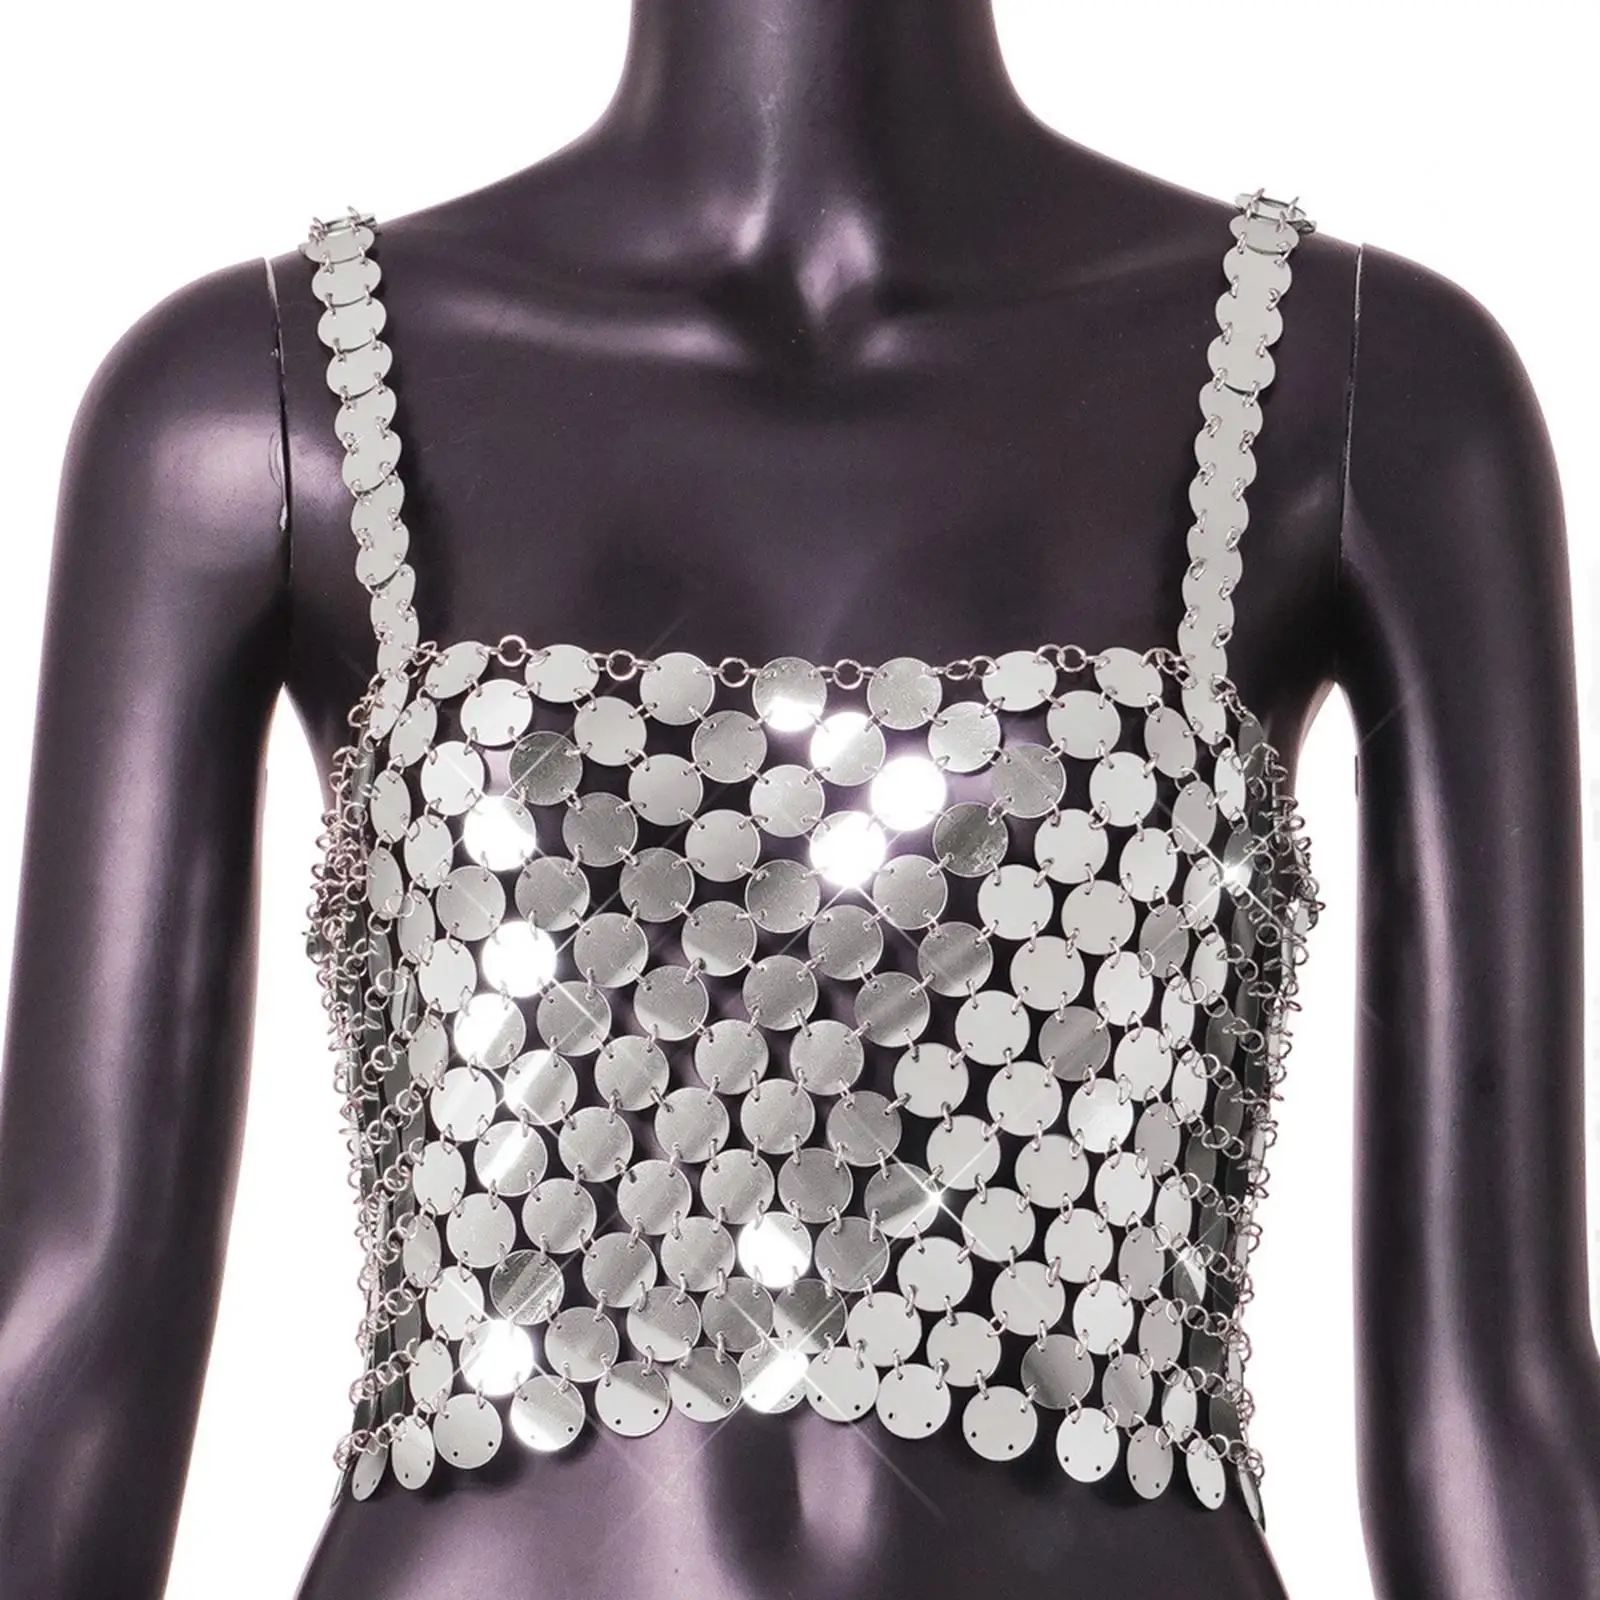 Shiny Sequined Crop Top Y2K Corset Vest Sparkly Hollow Out Outfit Glitter Bra Tops for Halloween Festival Nightclub Rave Party